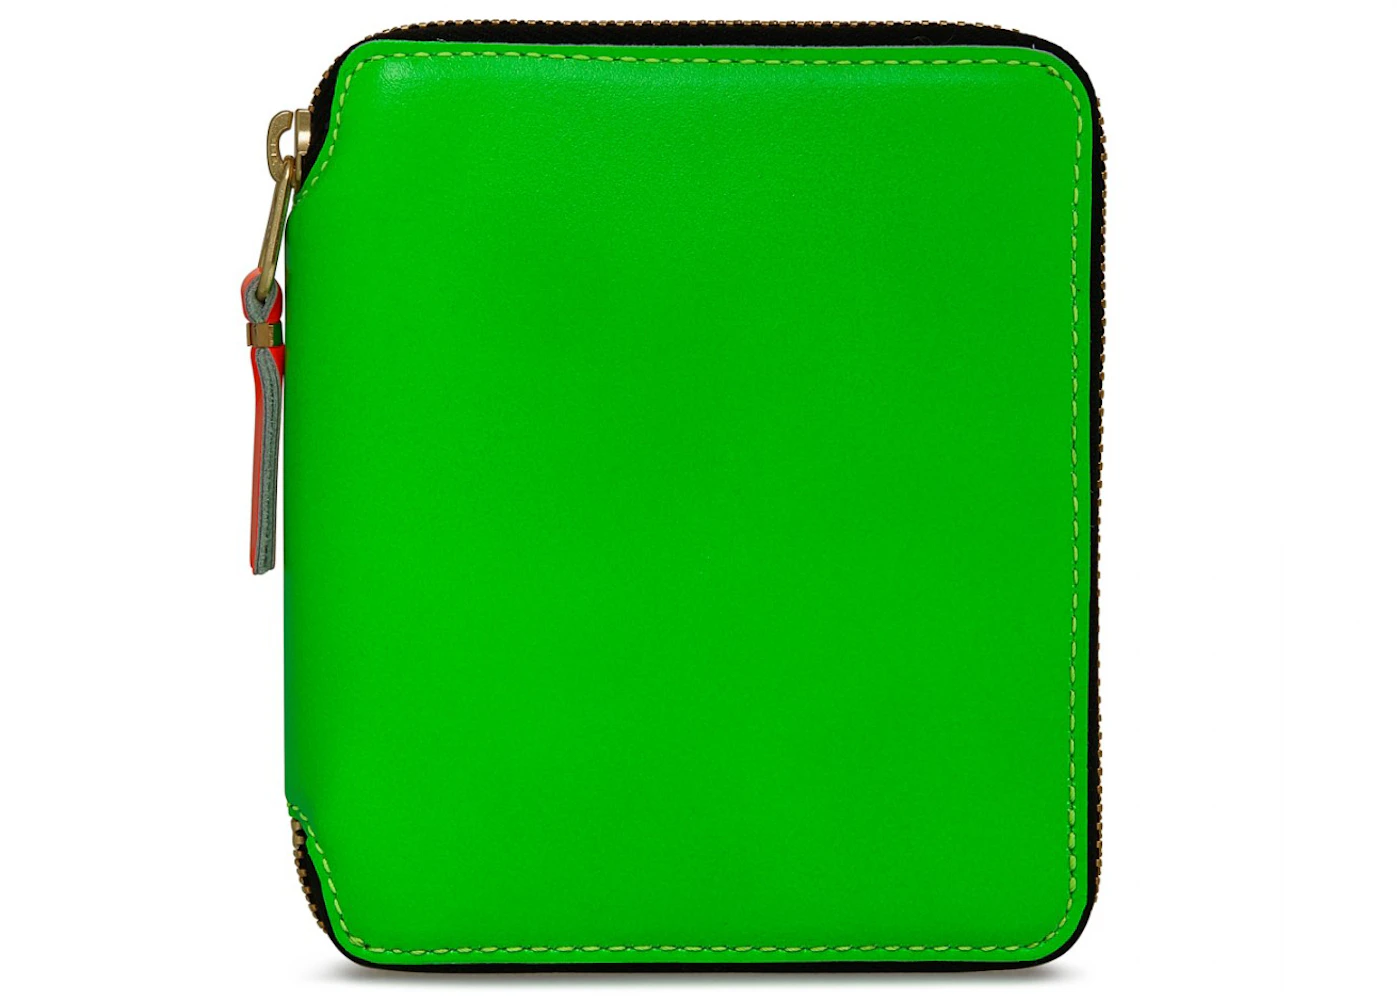 Comme des Garcons SA2100SF Super Fluo Wallet Green in Leather with Gold ...